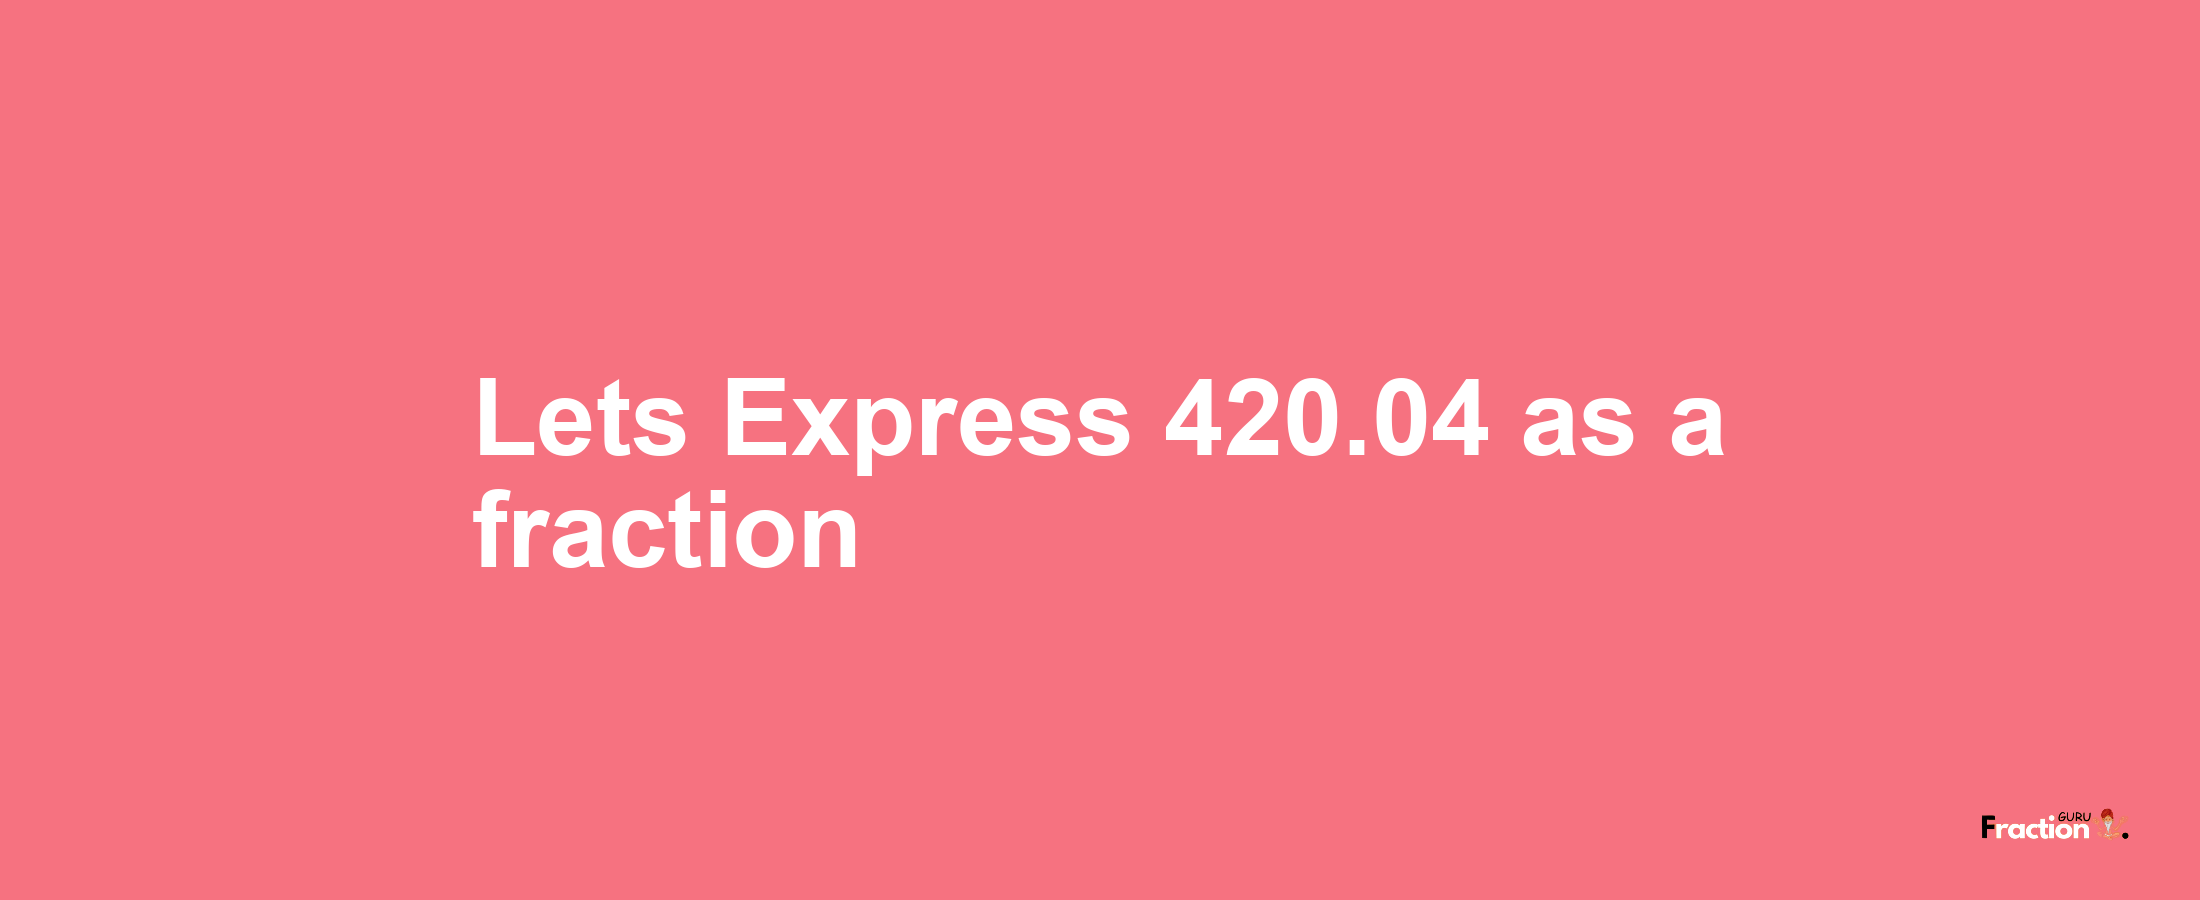 Lets Express 420.04 as afraction